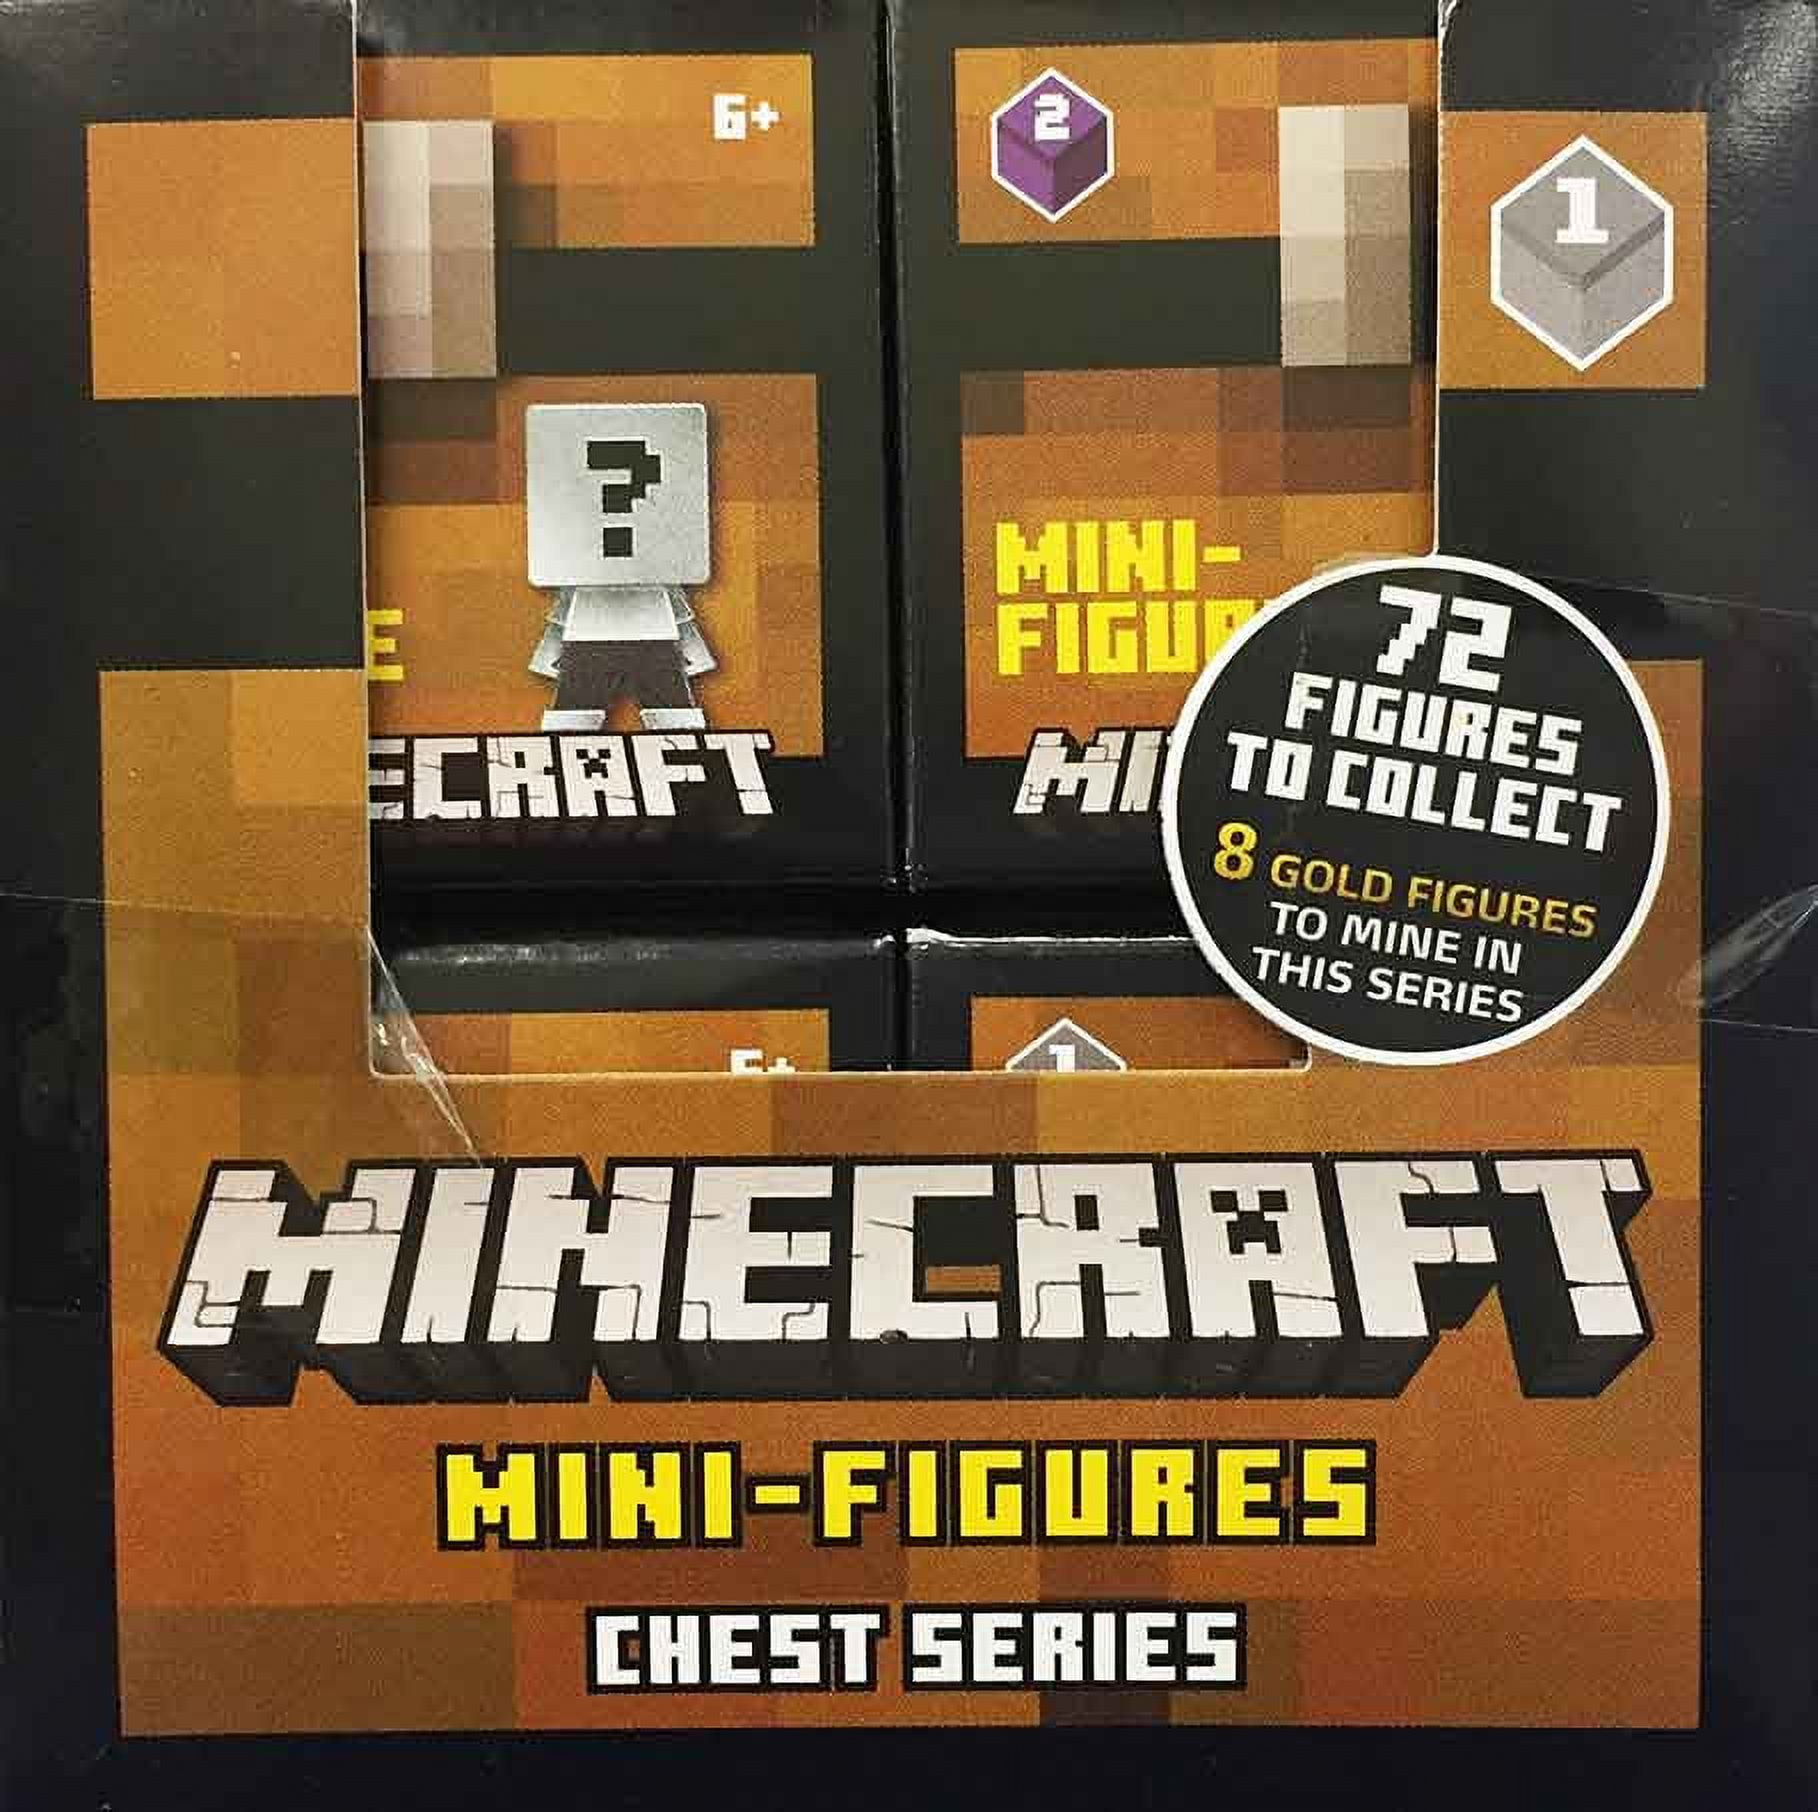 The Last Guest Skin Pack Minecraft Collection